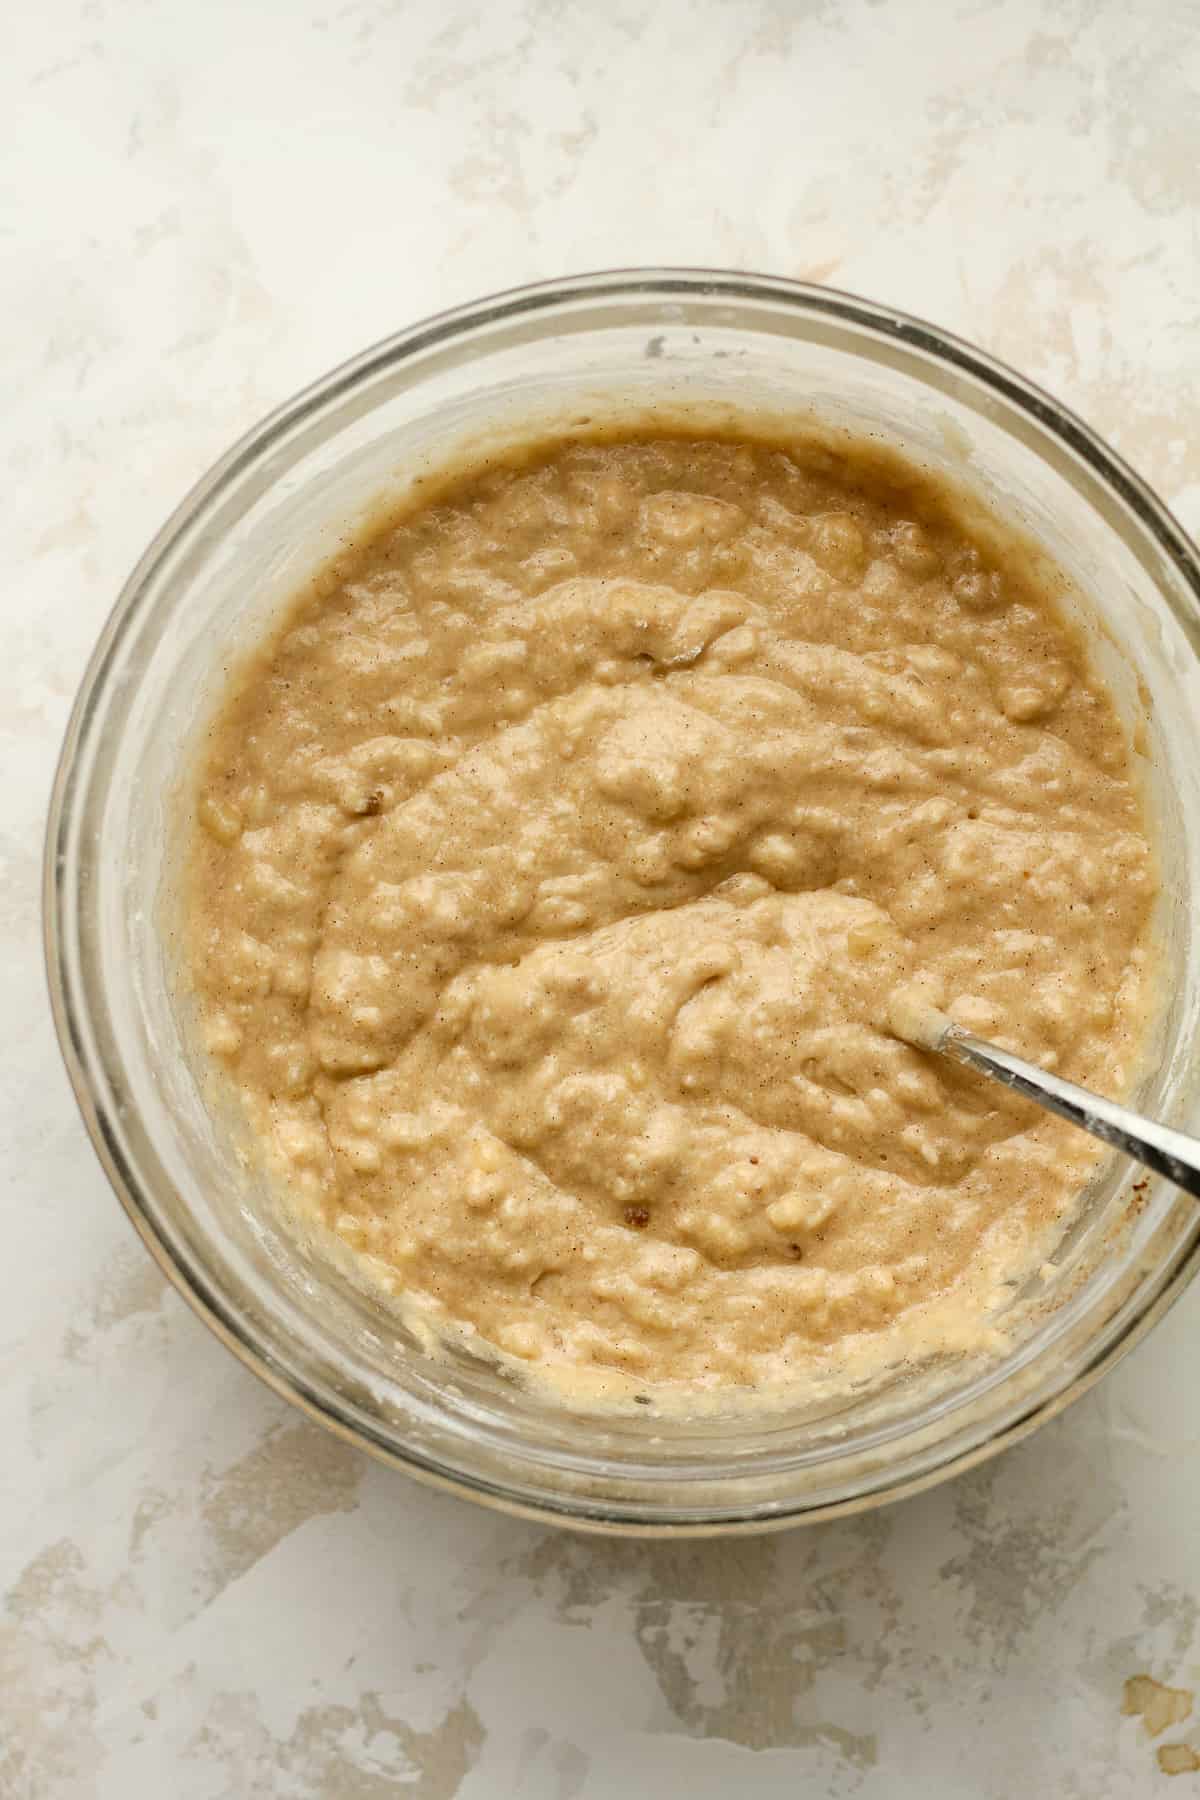 A bowl of the banana muffin batter.